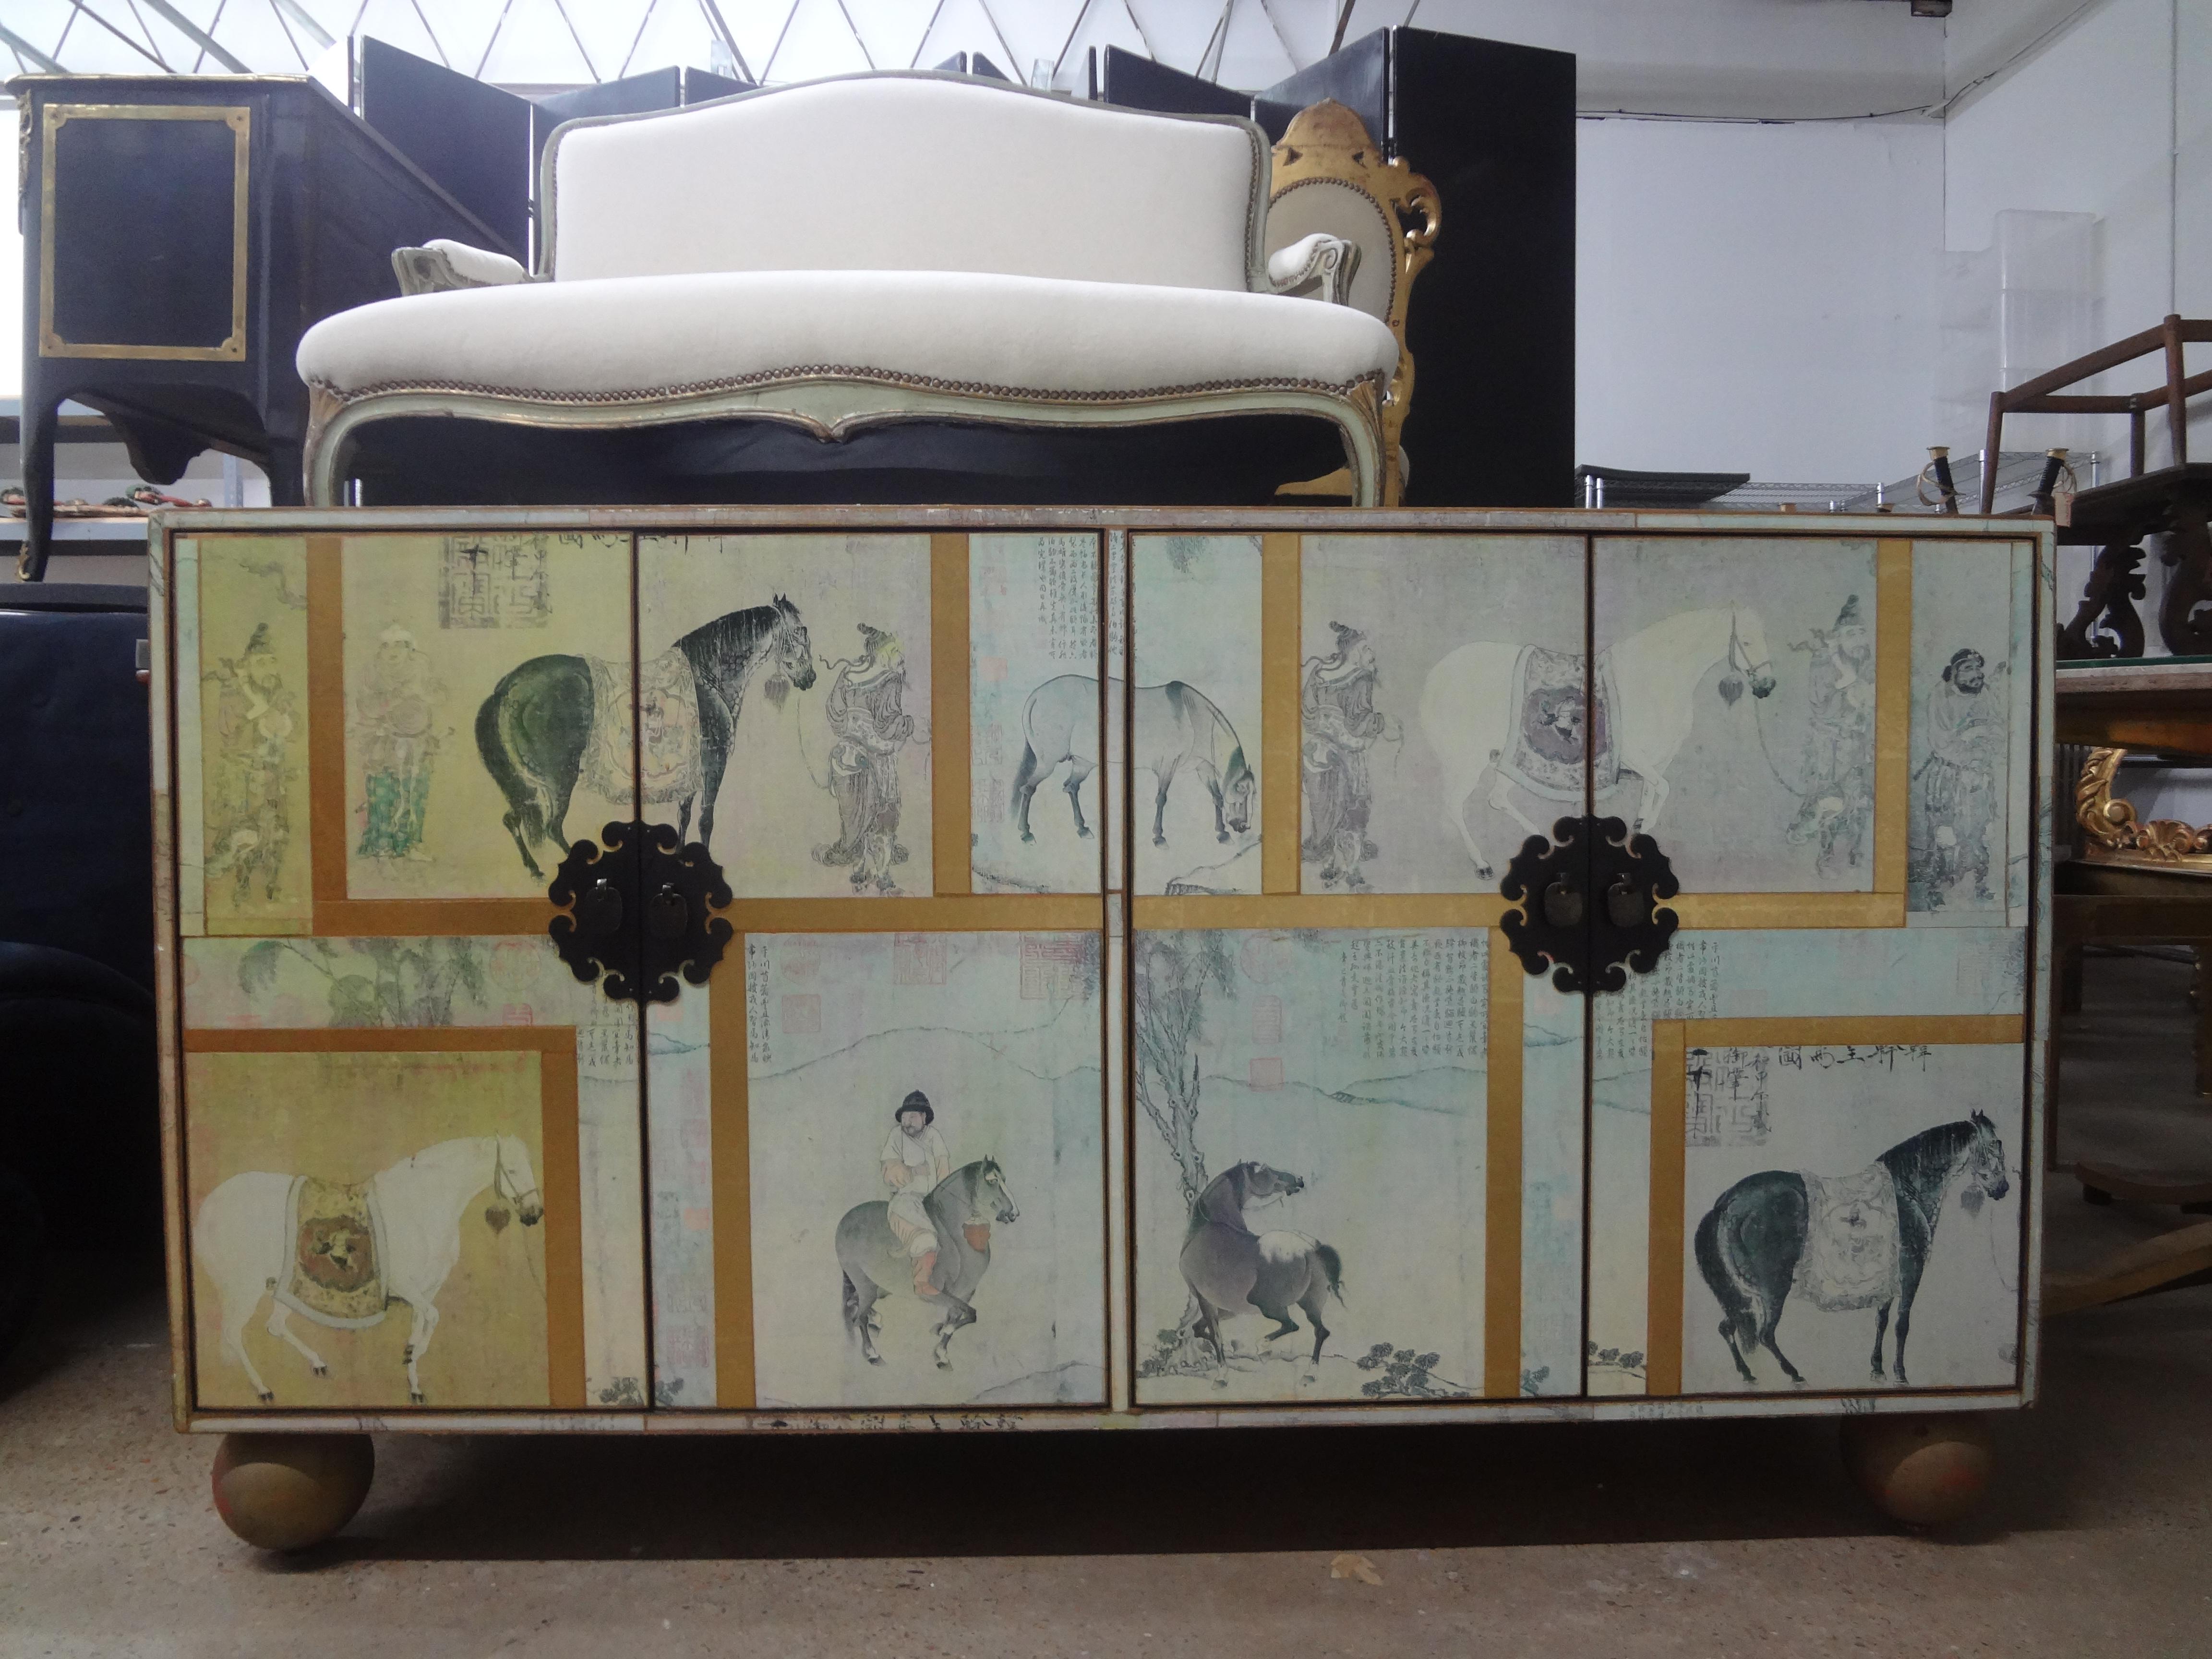 Vintage Chinoiserie Decopage Credenza.
Stunning 20th century four door credenza, buffet, chest or console with a beautiful equestrian themed Chinoiserie grisaille decopage design resting on giltwood sphere feet.
This lovely credenza has interior